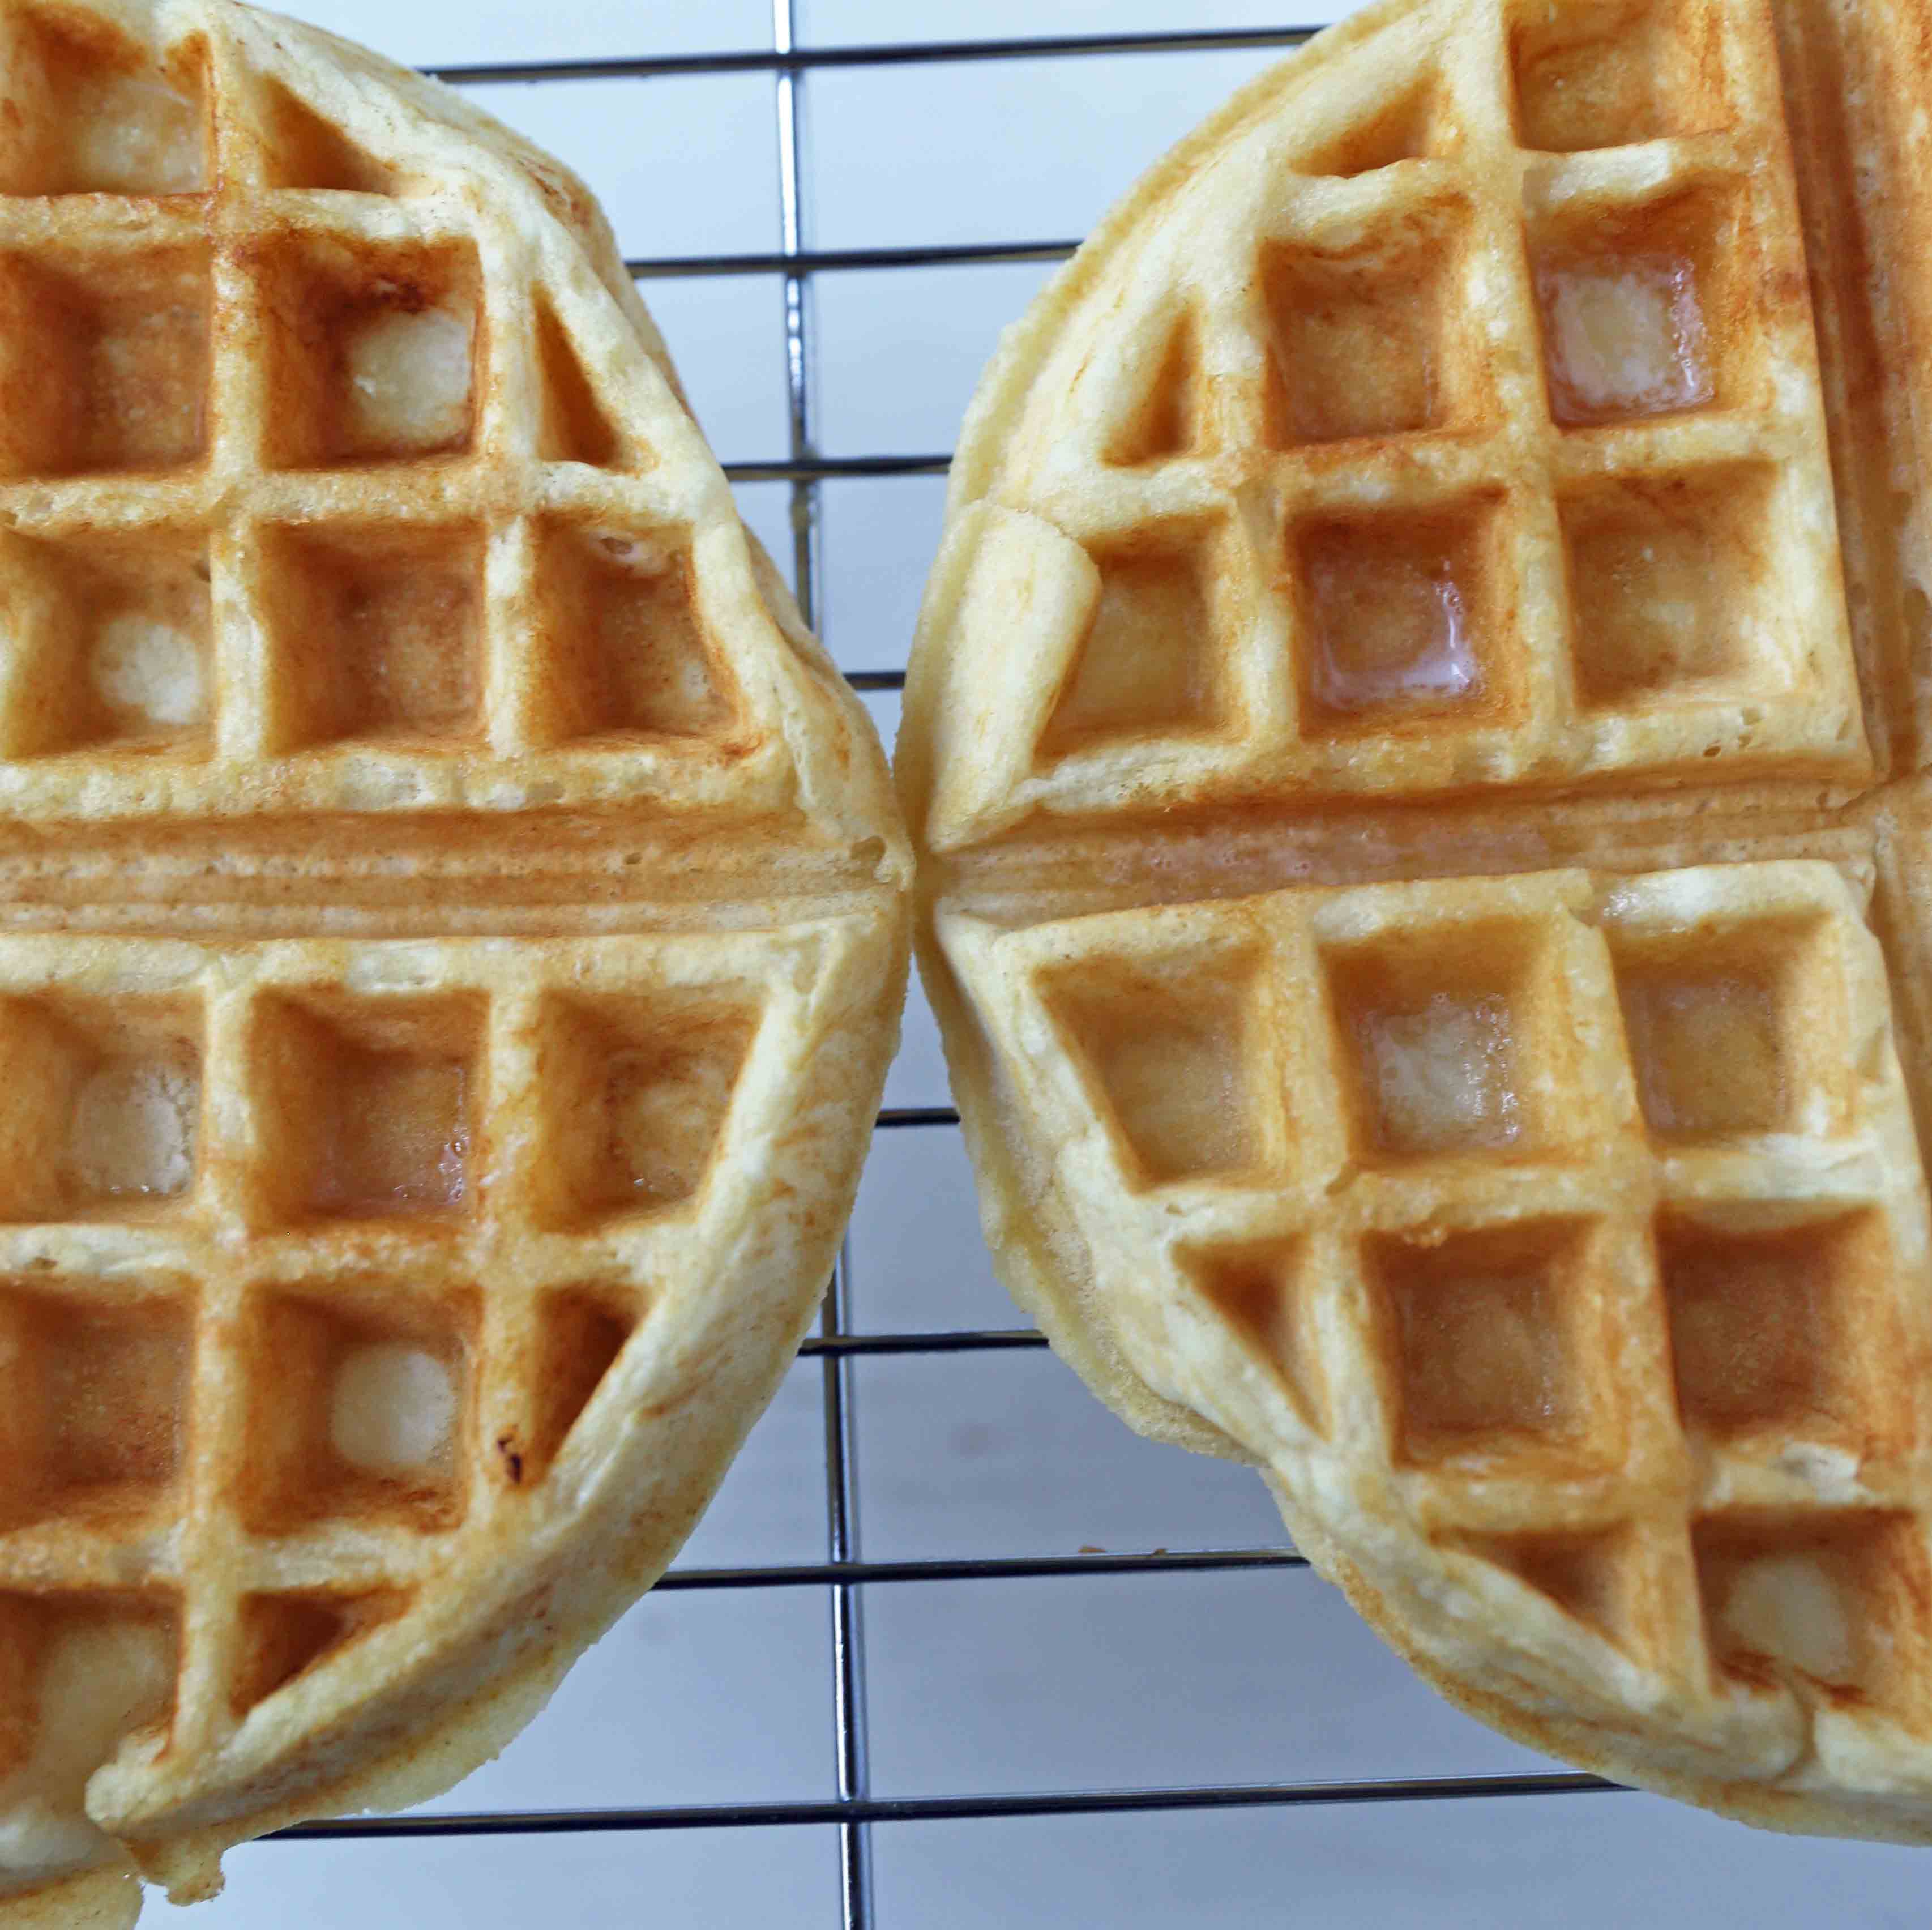 One Bowl Easy Buttermilk Waffles. Quick waffle recipe which creates chewy, crispy, and buttery waffles. The perfect waffle recipe. www.modernhoney.com #waffles #wafflerecipe #buttermilkwaffles #buttermilkwaffle 